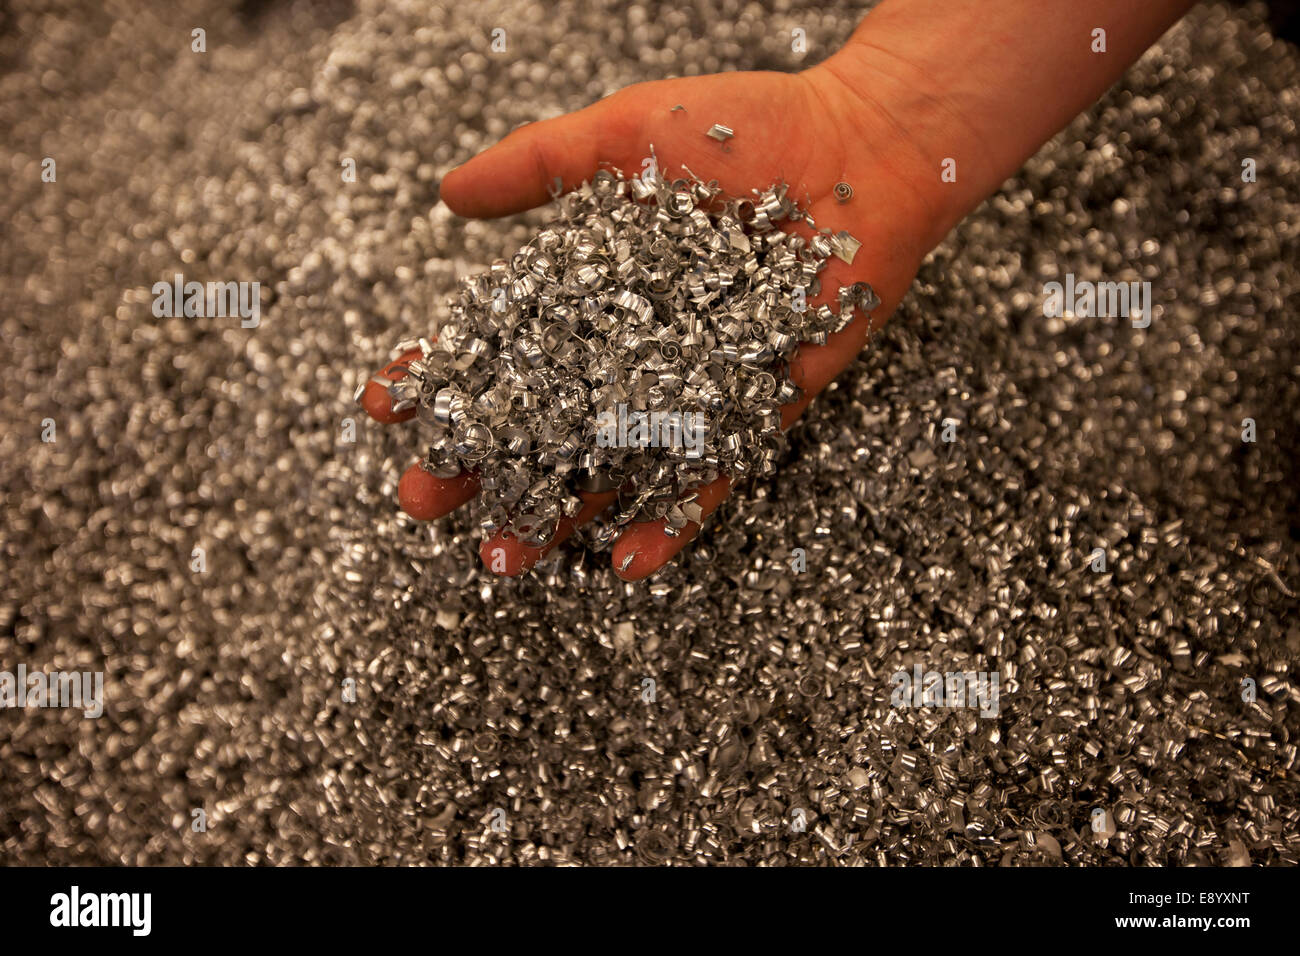 A hand that takes up metal shavings Stock Photo